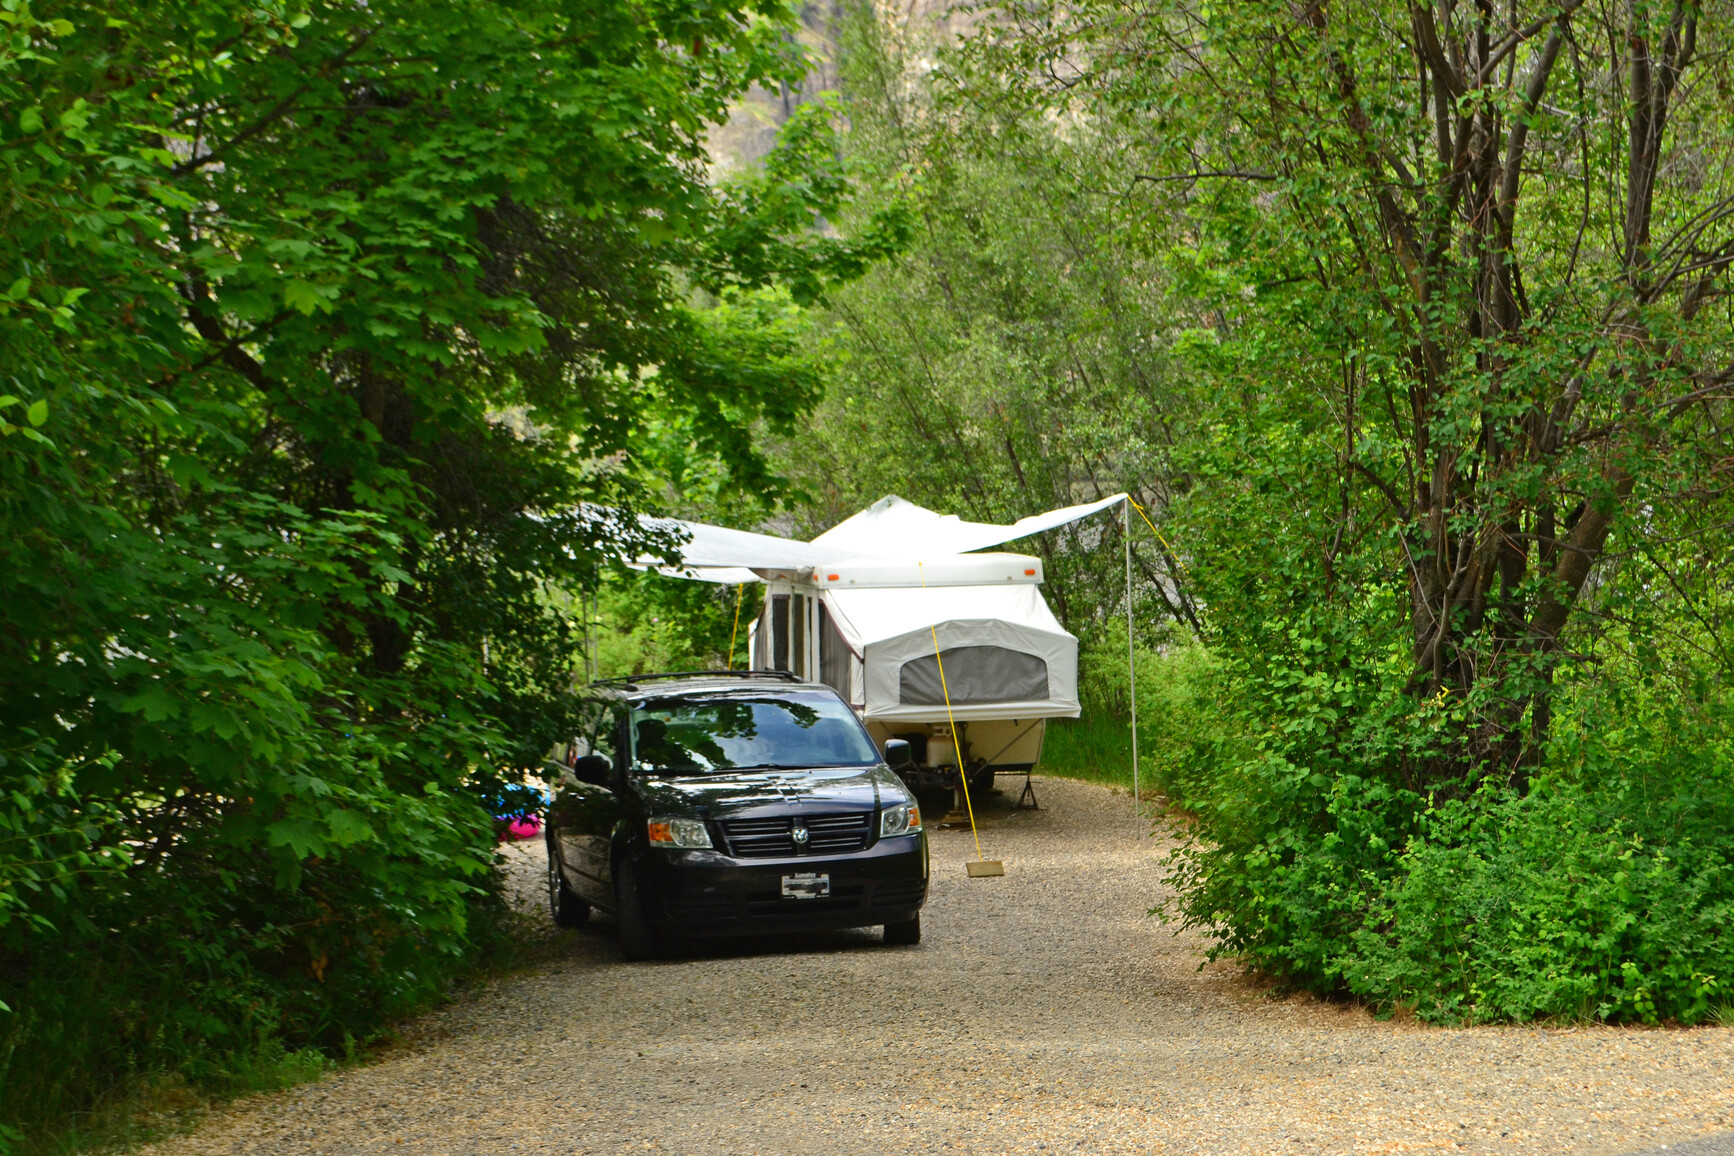 Photo of a campsite surrounded by trees and shrubs. There is a vehicle and a tent trailer in the campsite.